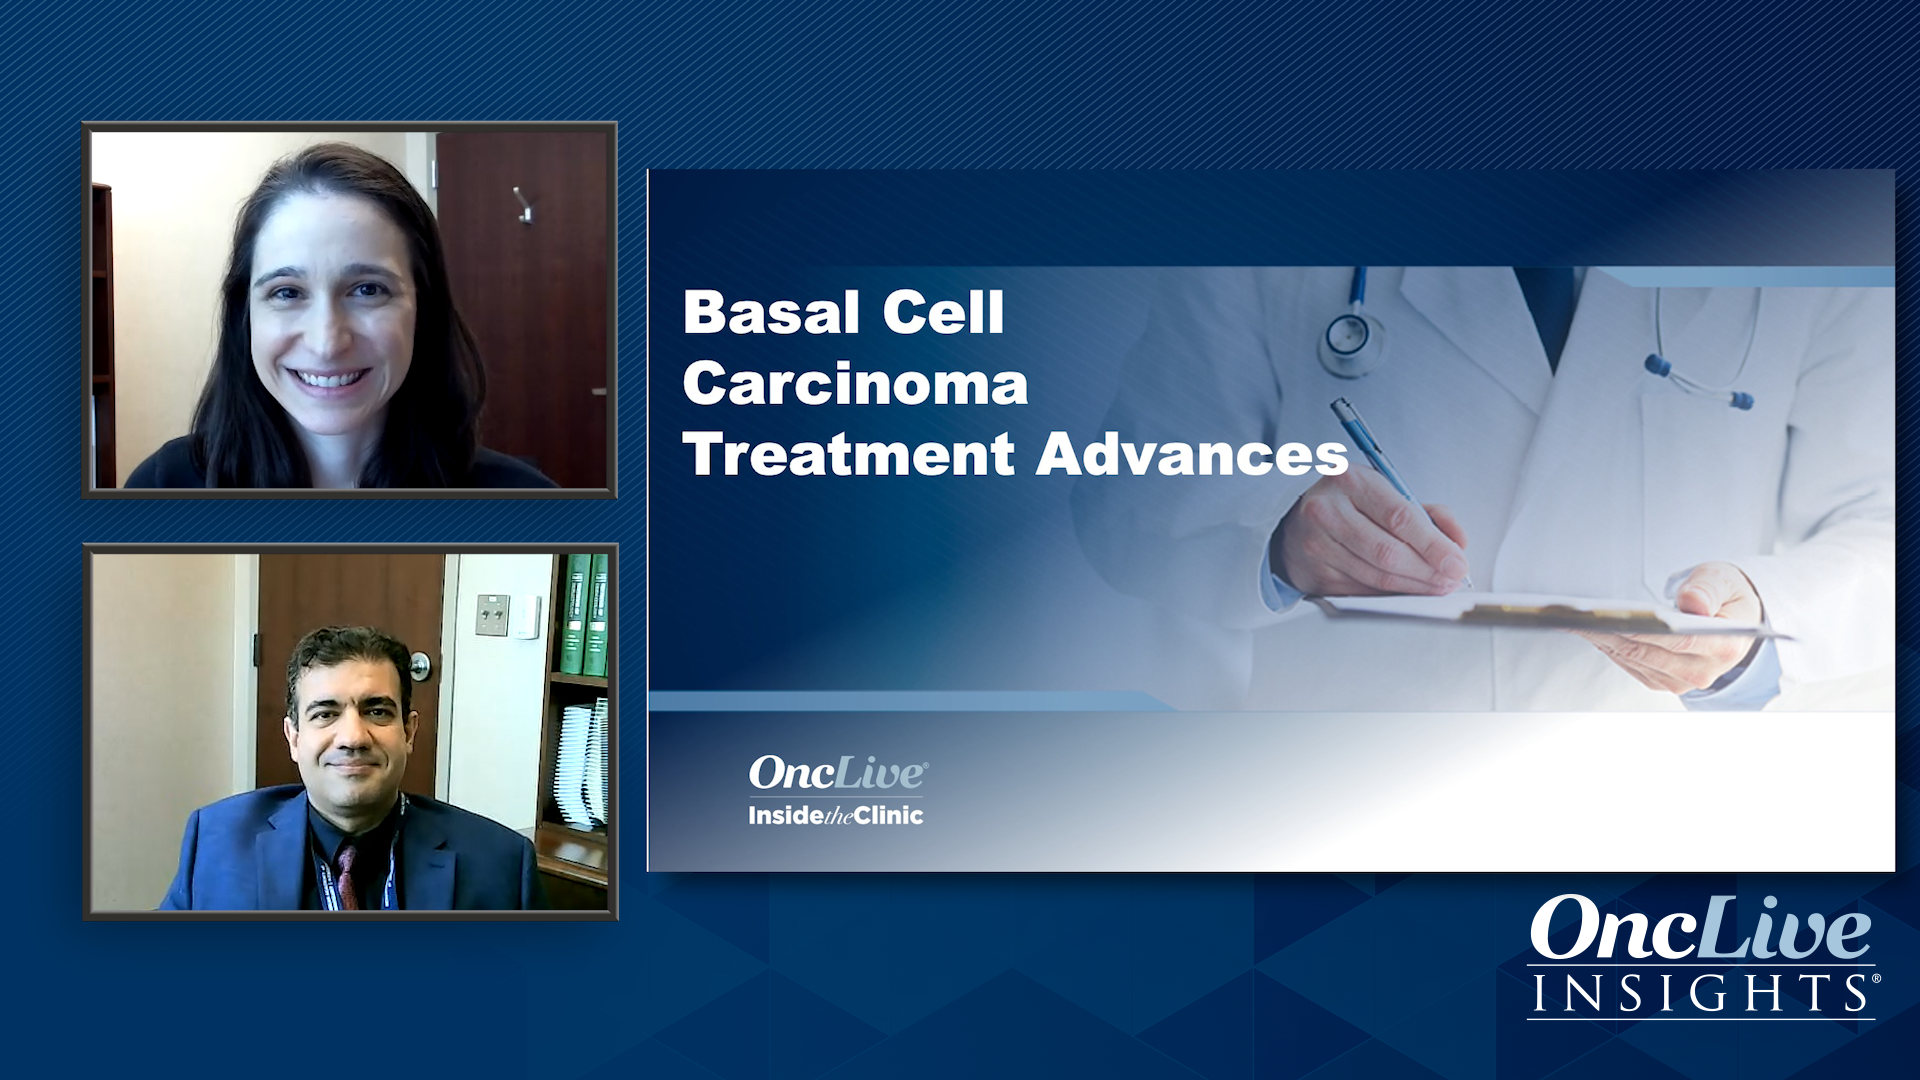 Inside the Clinic: Basal Cell Carcinoma Treatment Advances